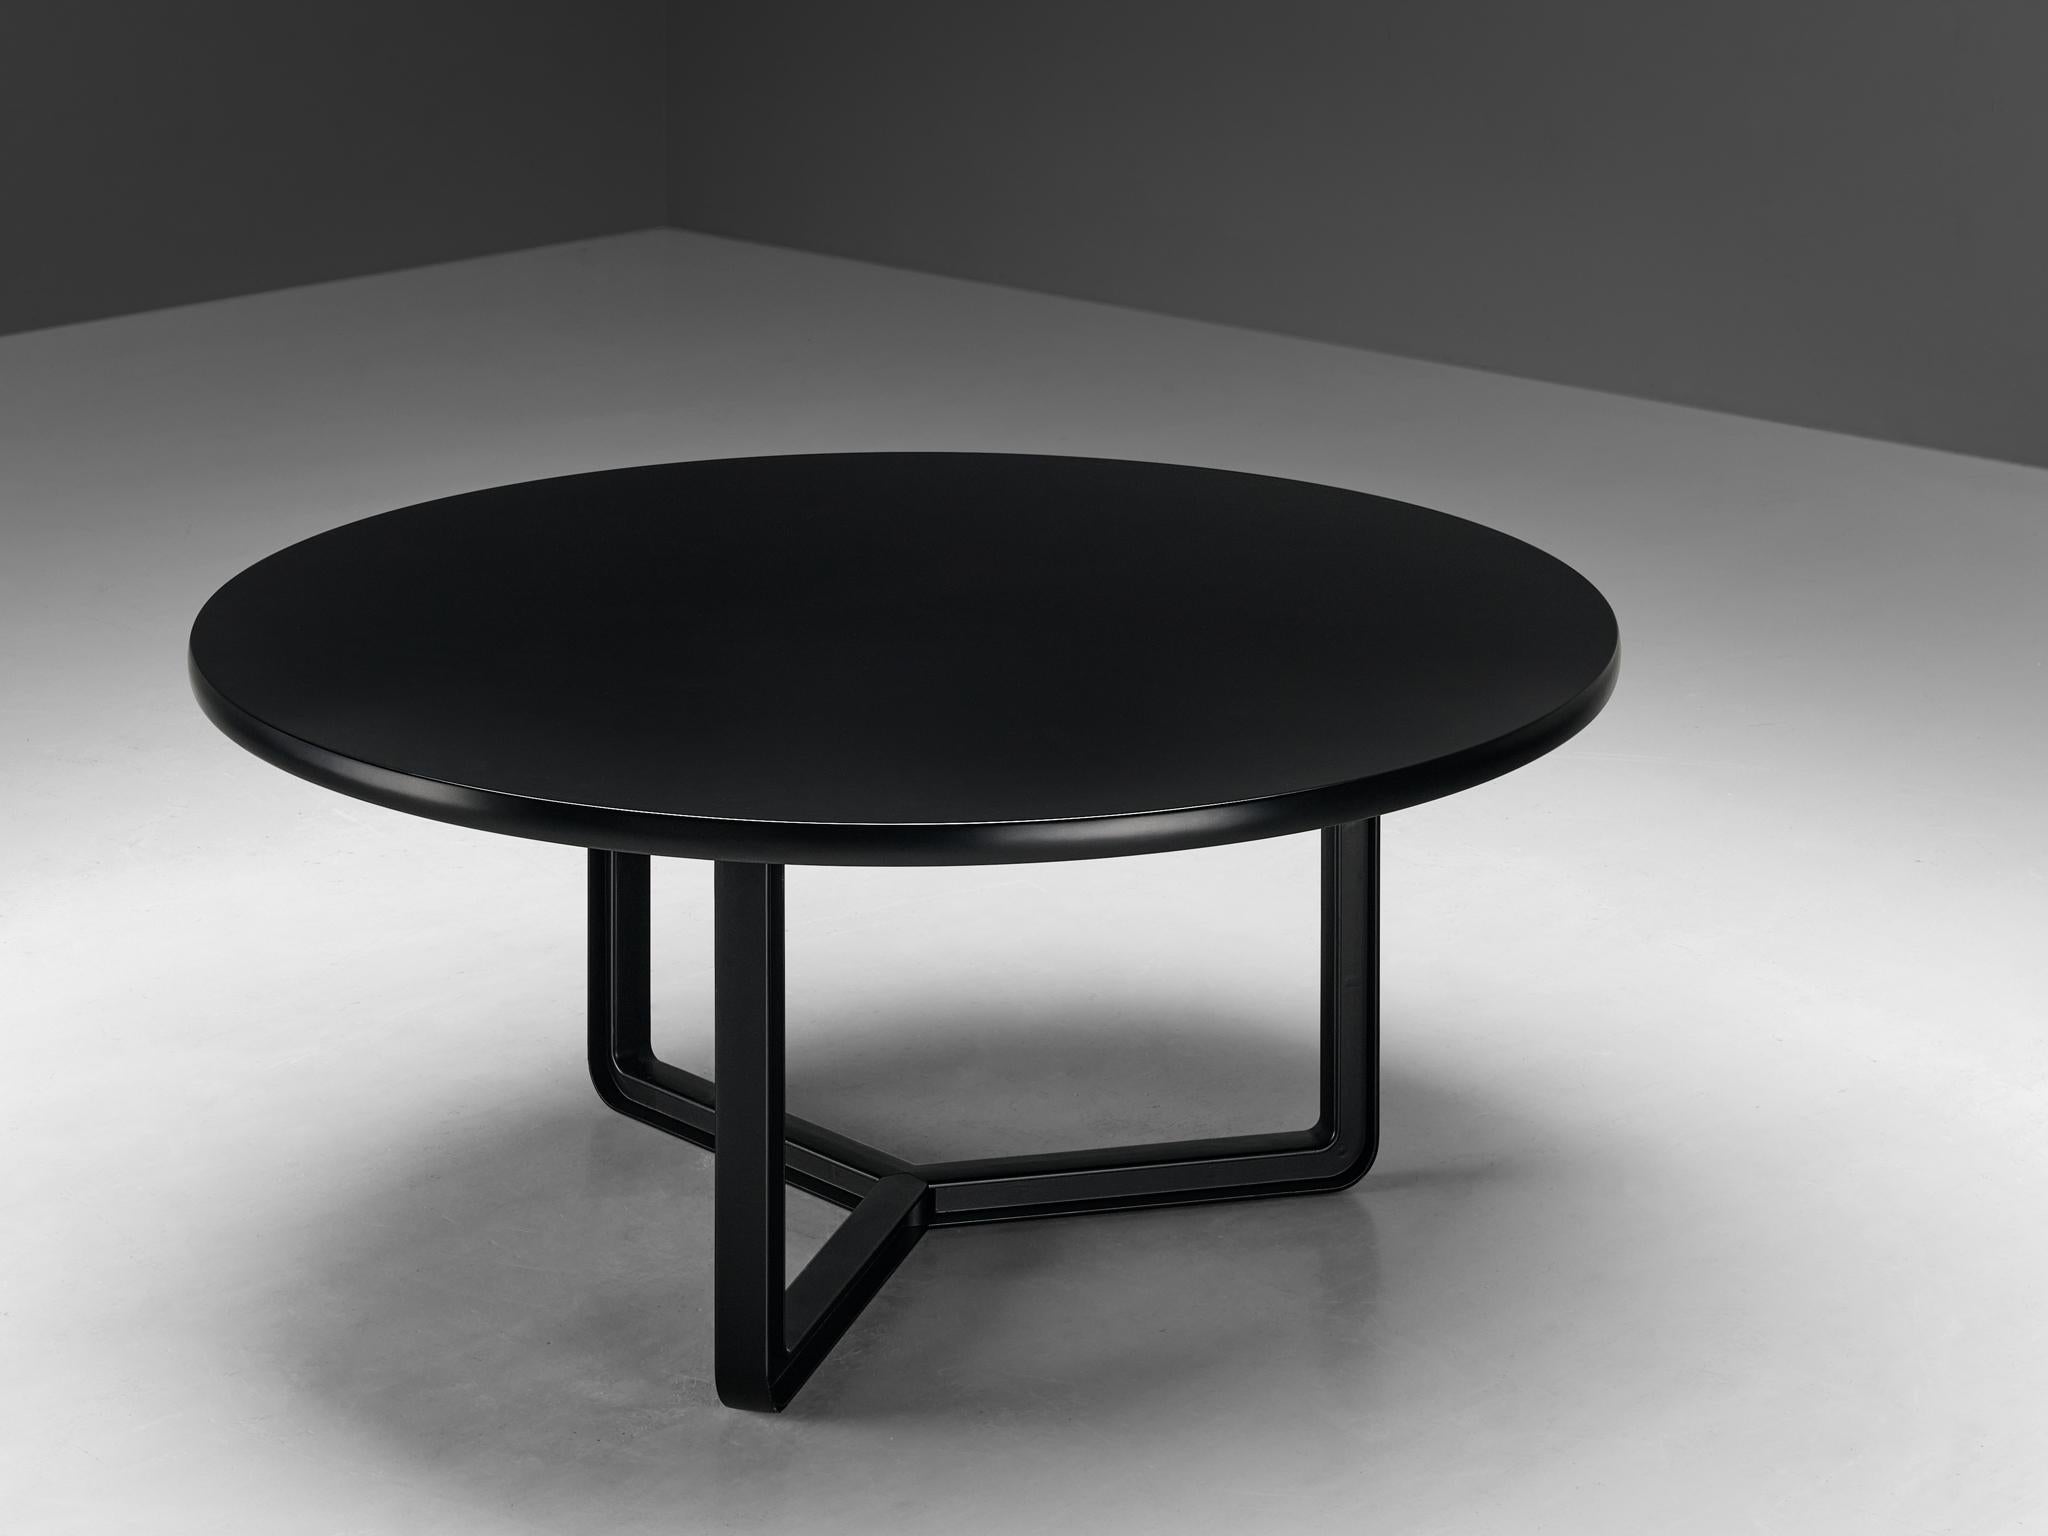 Centro Progetti Tecno, dining table model 'T334C', lacquered wood, lacquered aluminum, Italy, 1975-1978

Round dining table with a black lacquered wooden top that has an incredibly soft texture. The tabletop is mounted on a three-legged metal frame